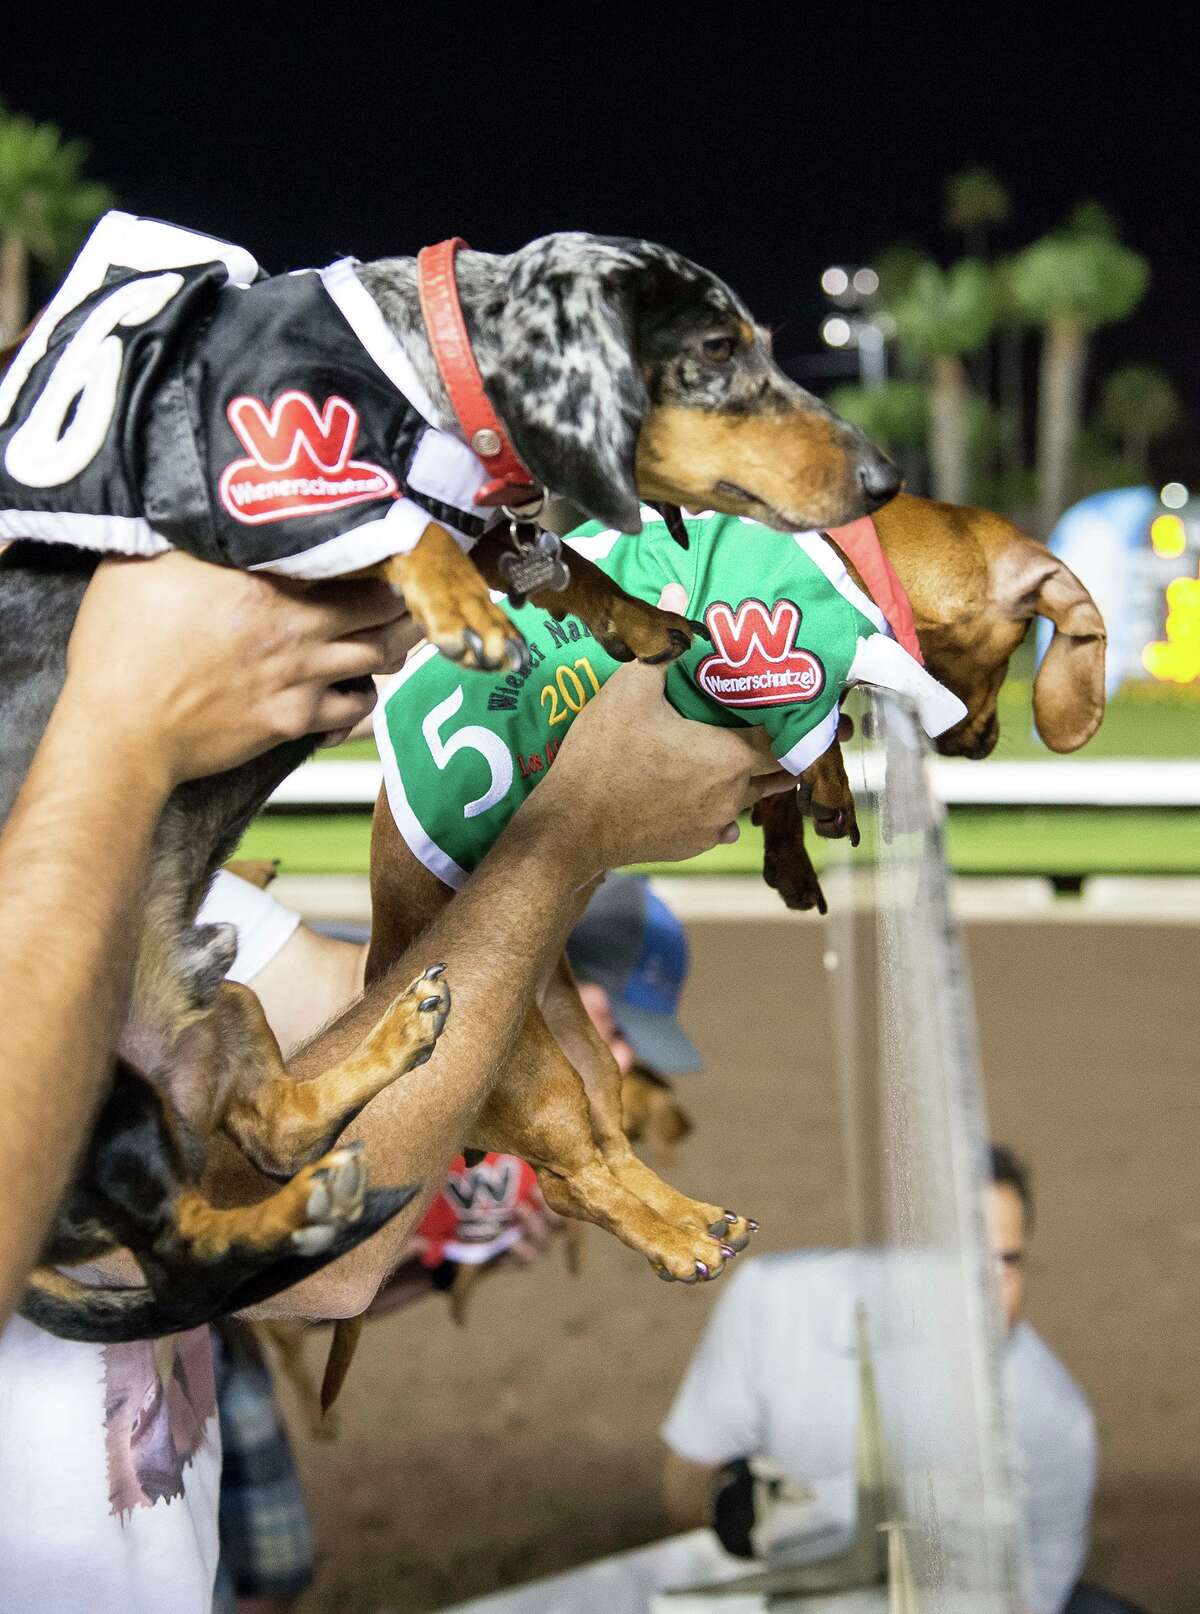 A California race course held its 21st annual Wienerschnitzel Wiener Nationals on July 19 where 90 dogs raced for the title of the fastest wiener in the West.